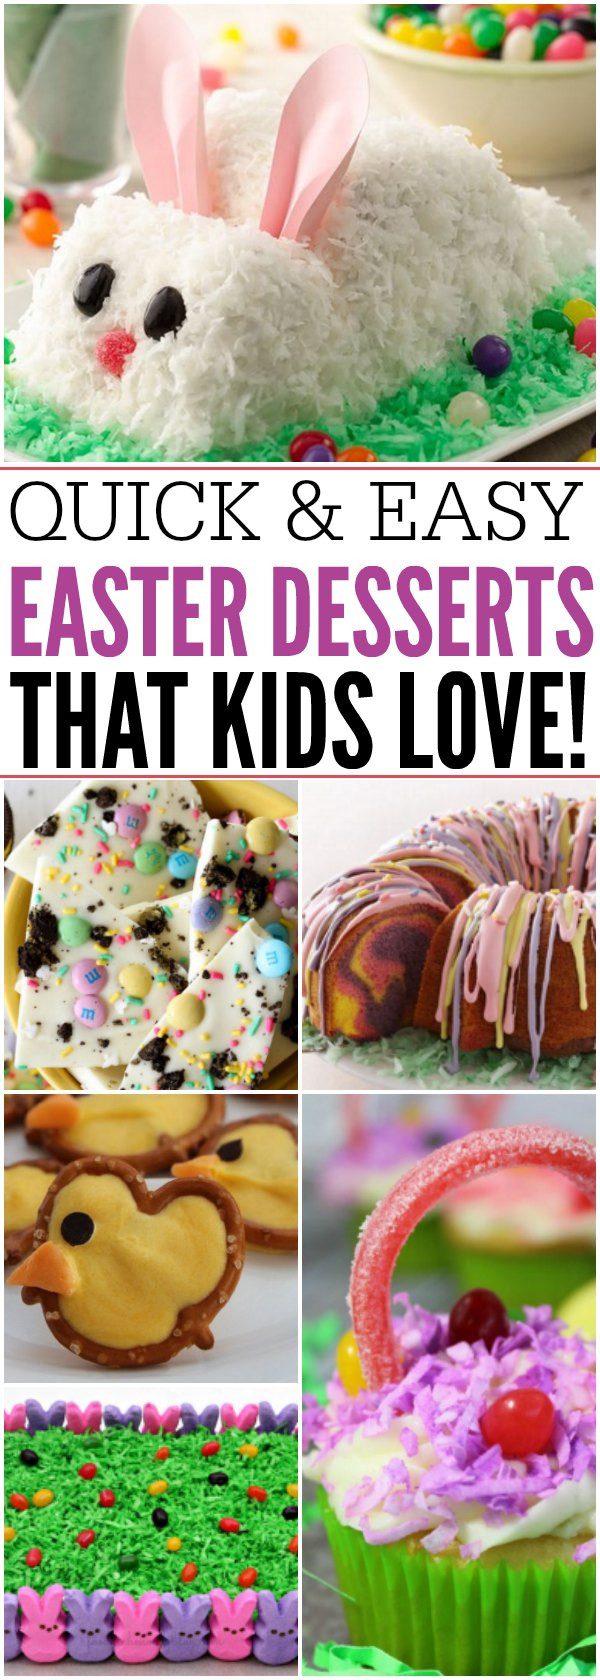 Easter Desserts For Kids
 16 Quick and Easy Easter Dessert Recipes That Everyone